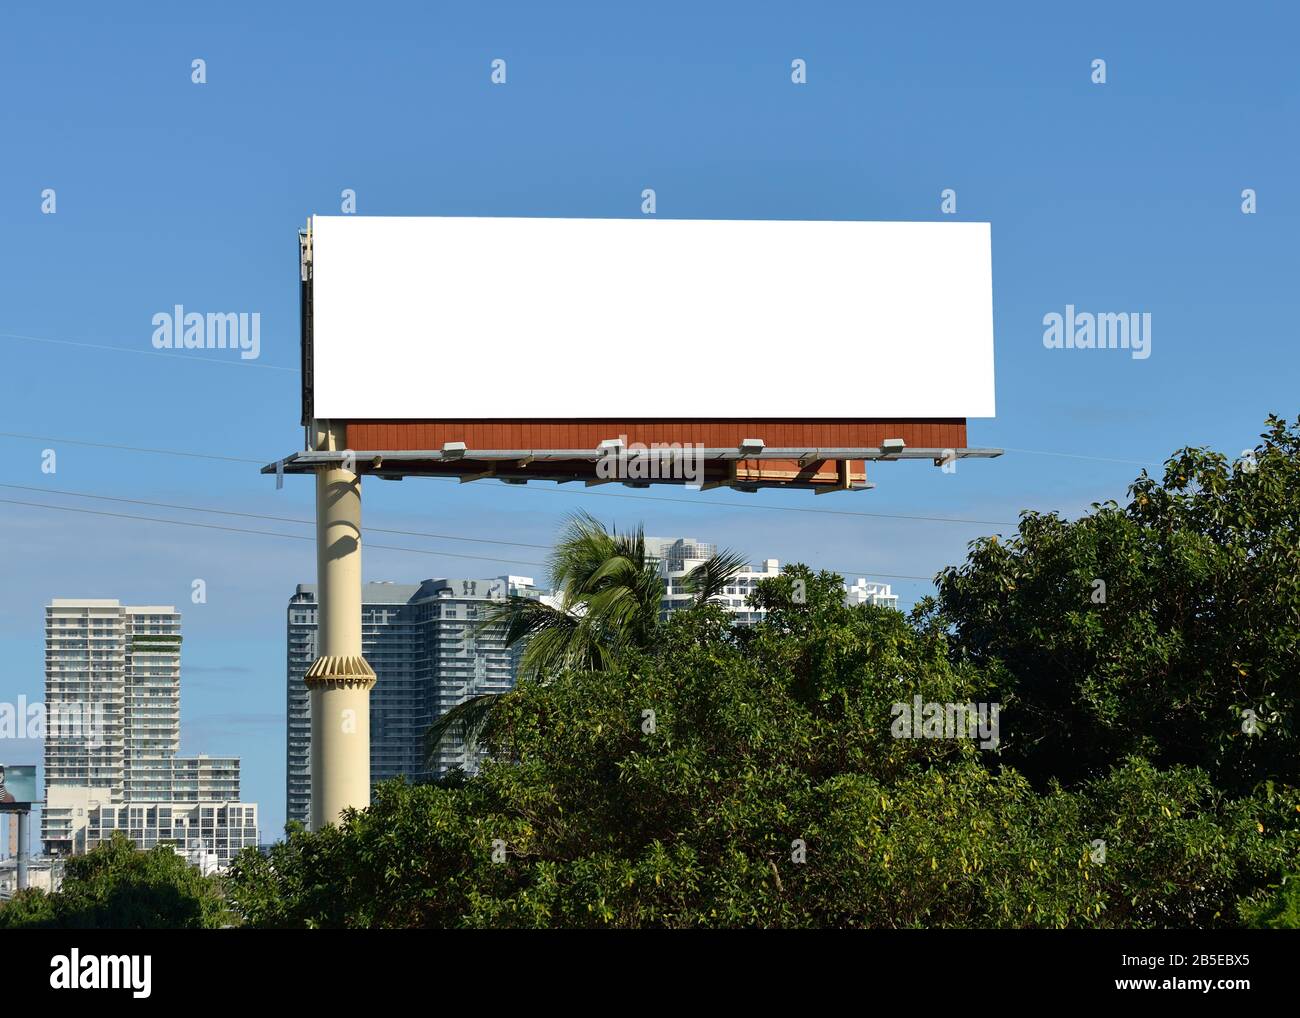 Large Billboard in the city. Green trees, modern buildings, blue sky. Outdoor advertising in South Florida. Stock Photo